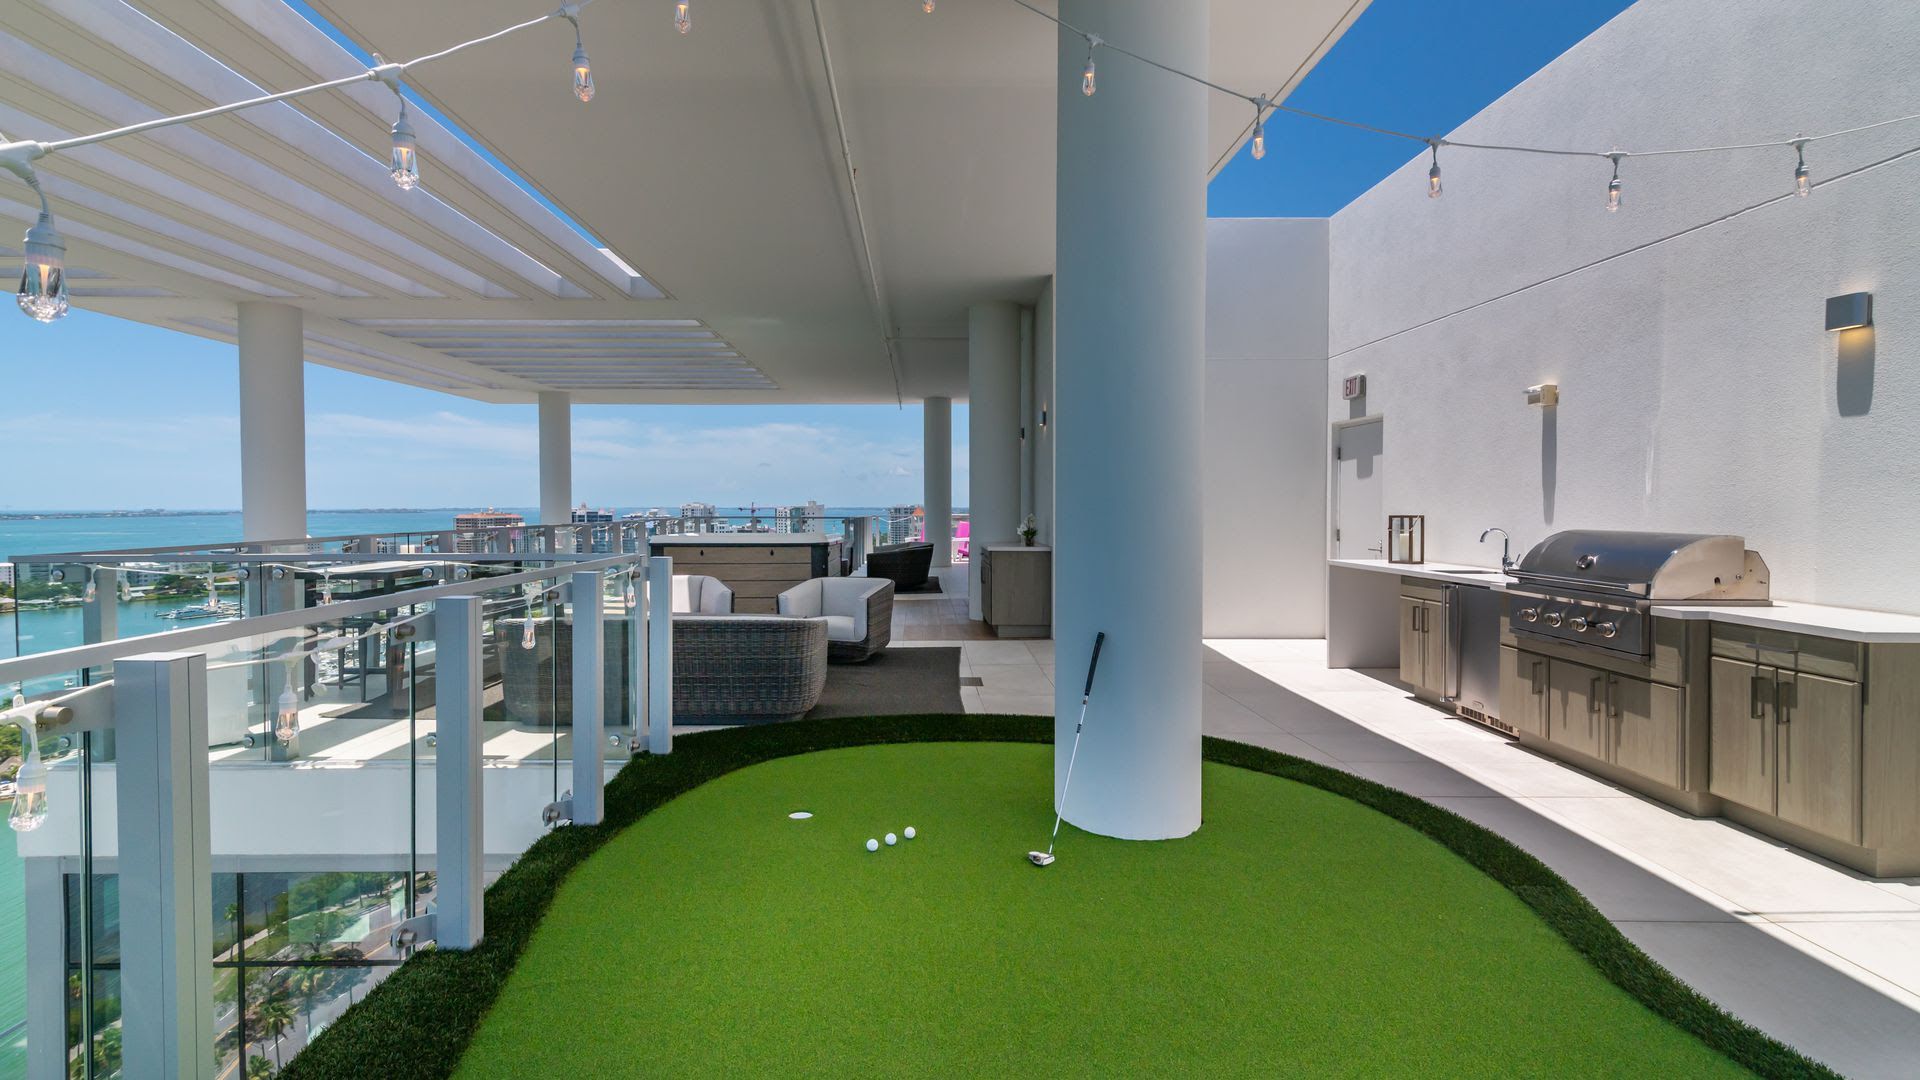 A photo of a rooftop putting green at a residence for sale in Sarasota, Florida, for $16 million.